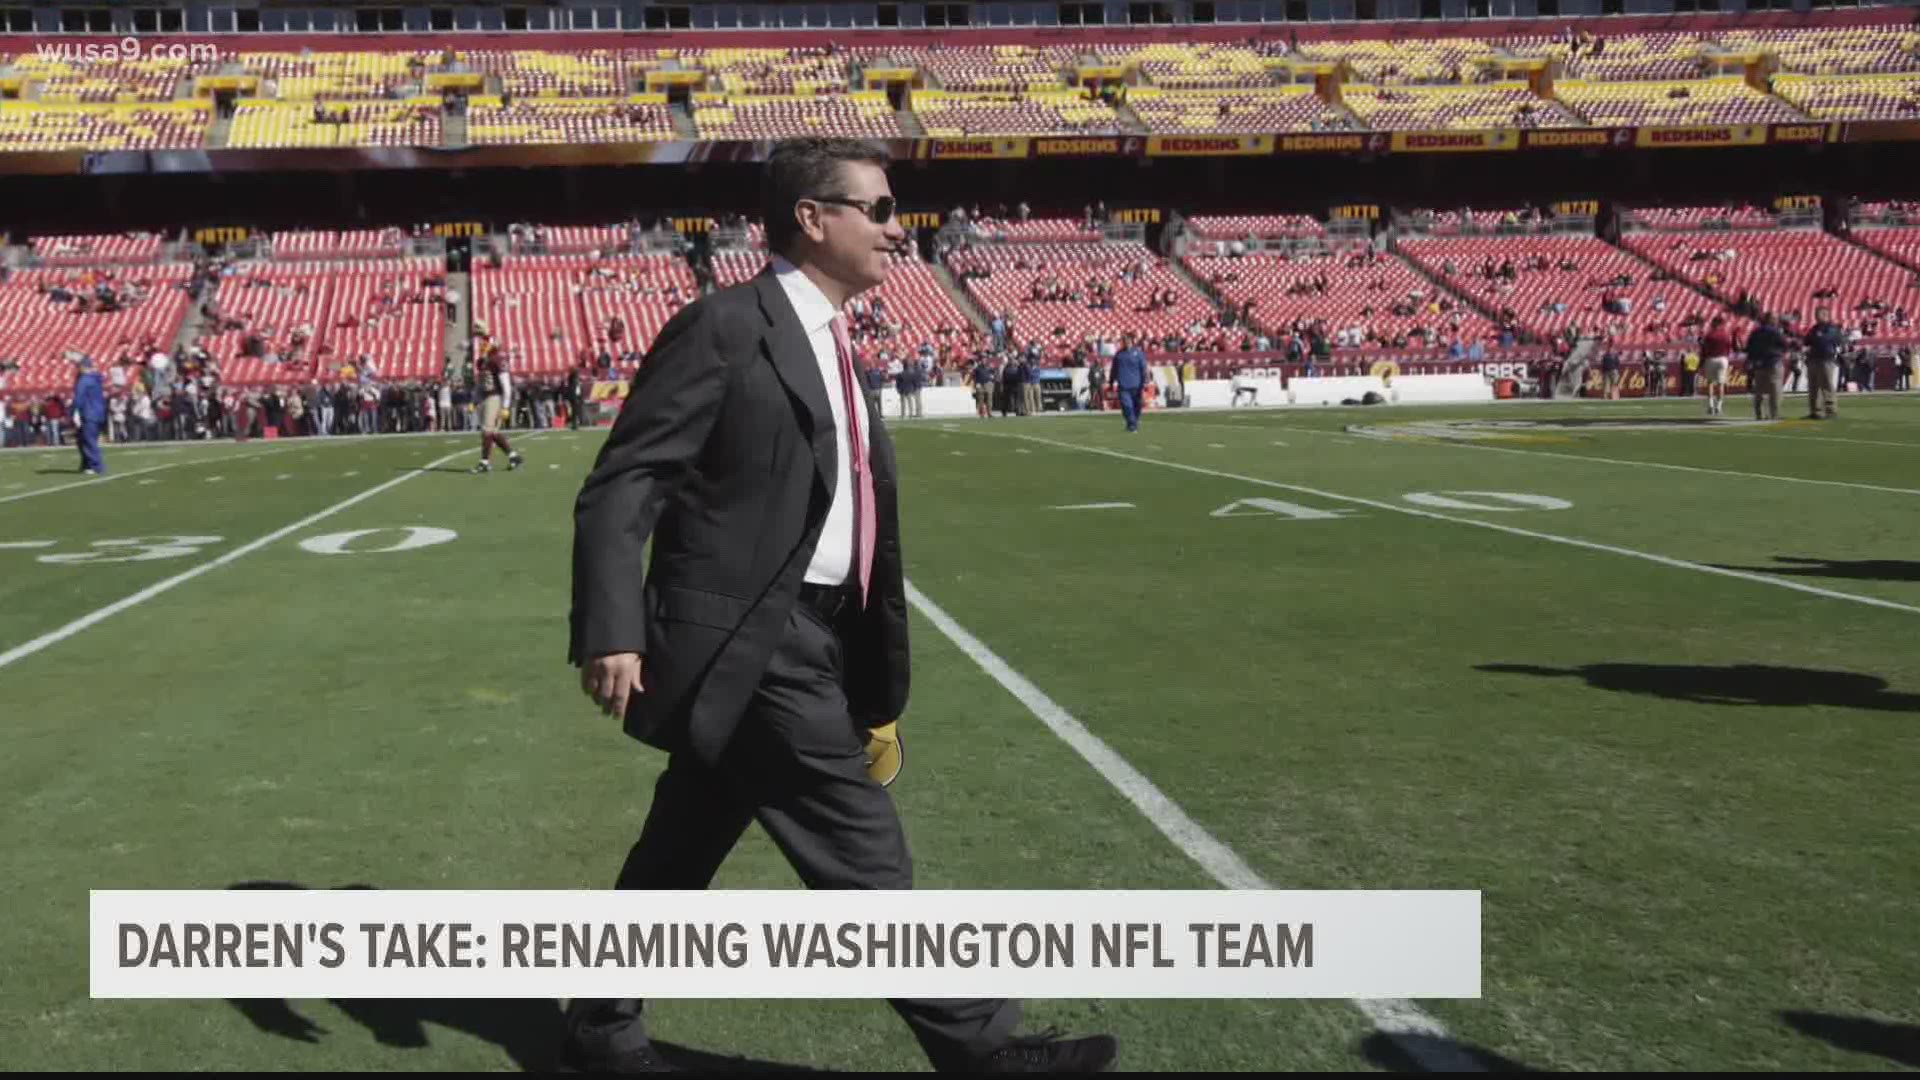 WUSA9 sports director Darren Haynes called the decision a win "not just for Native Americans, but any minority group belittled in American history."